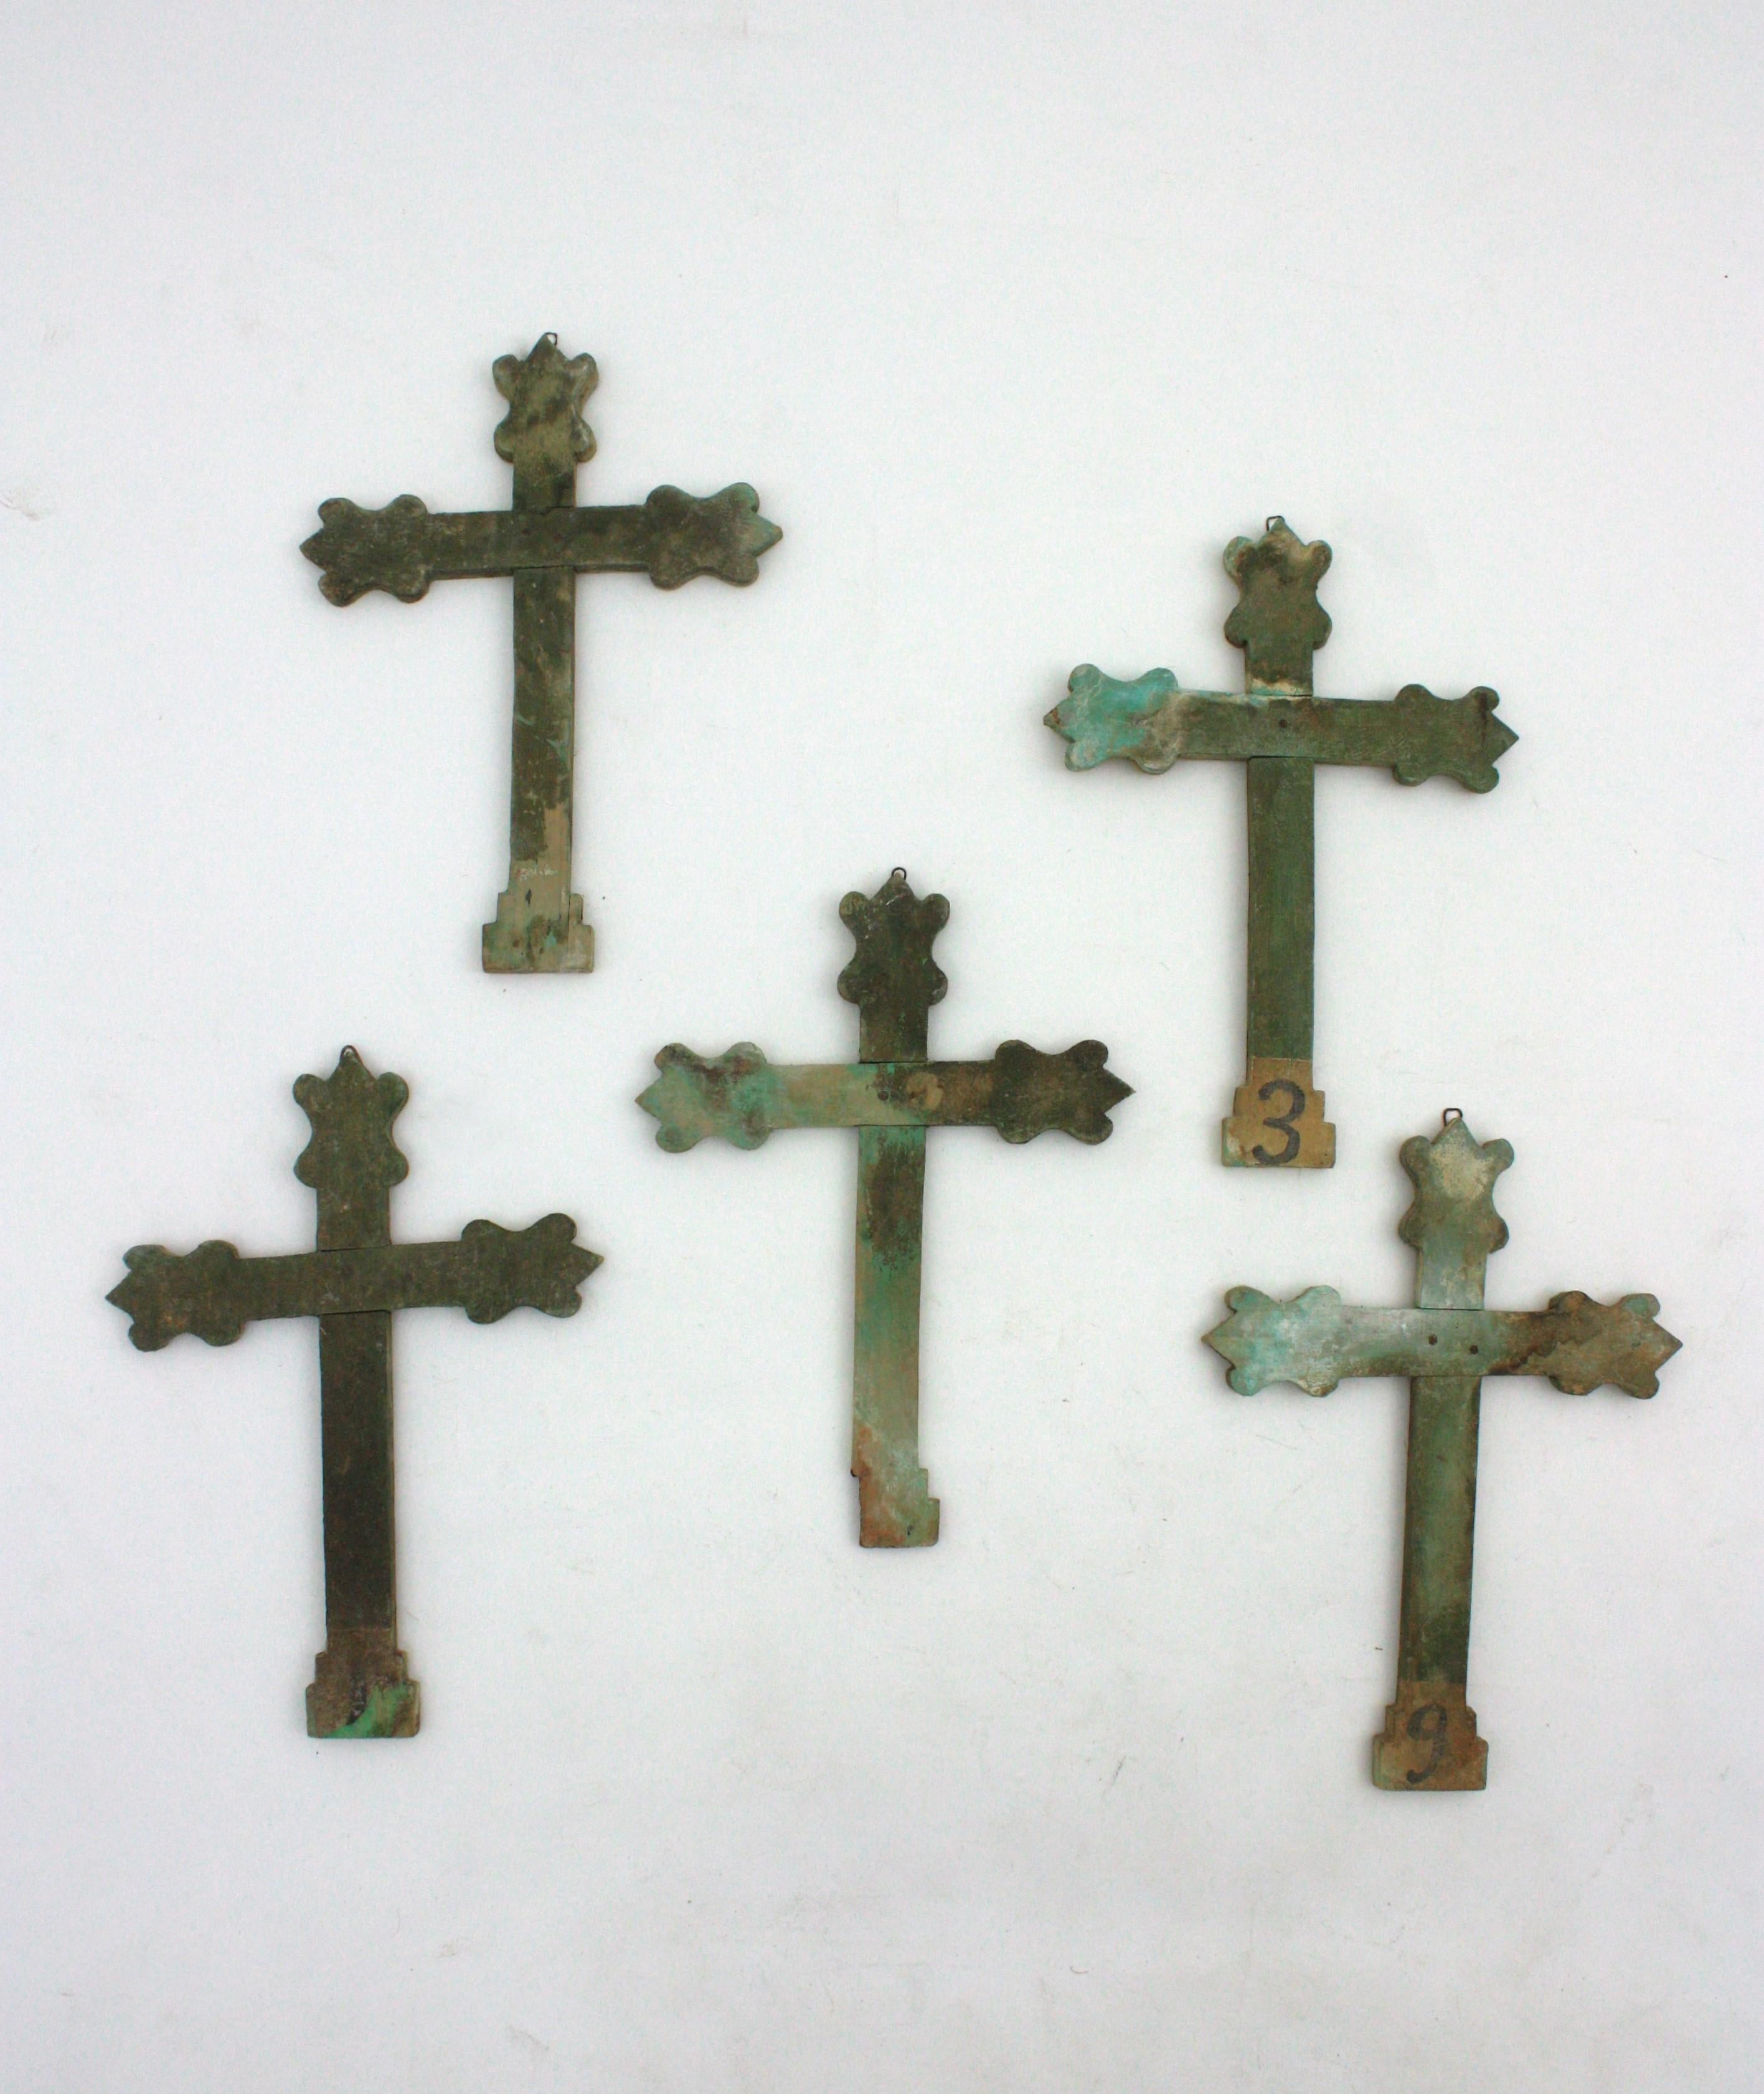 Five Stations of the Cross, 'Via Crucis' Religious Wall Composition, Spain, 1940s
From the Northern part of Spain.
A set of Five Crosses of The Way of the Cross: Each station was made in carved wood and patinated in shades of green.
Terrific